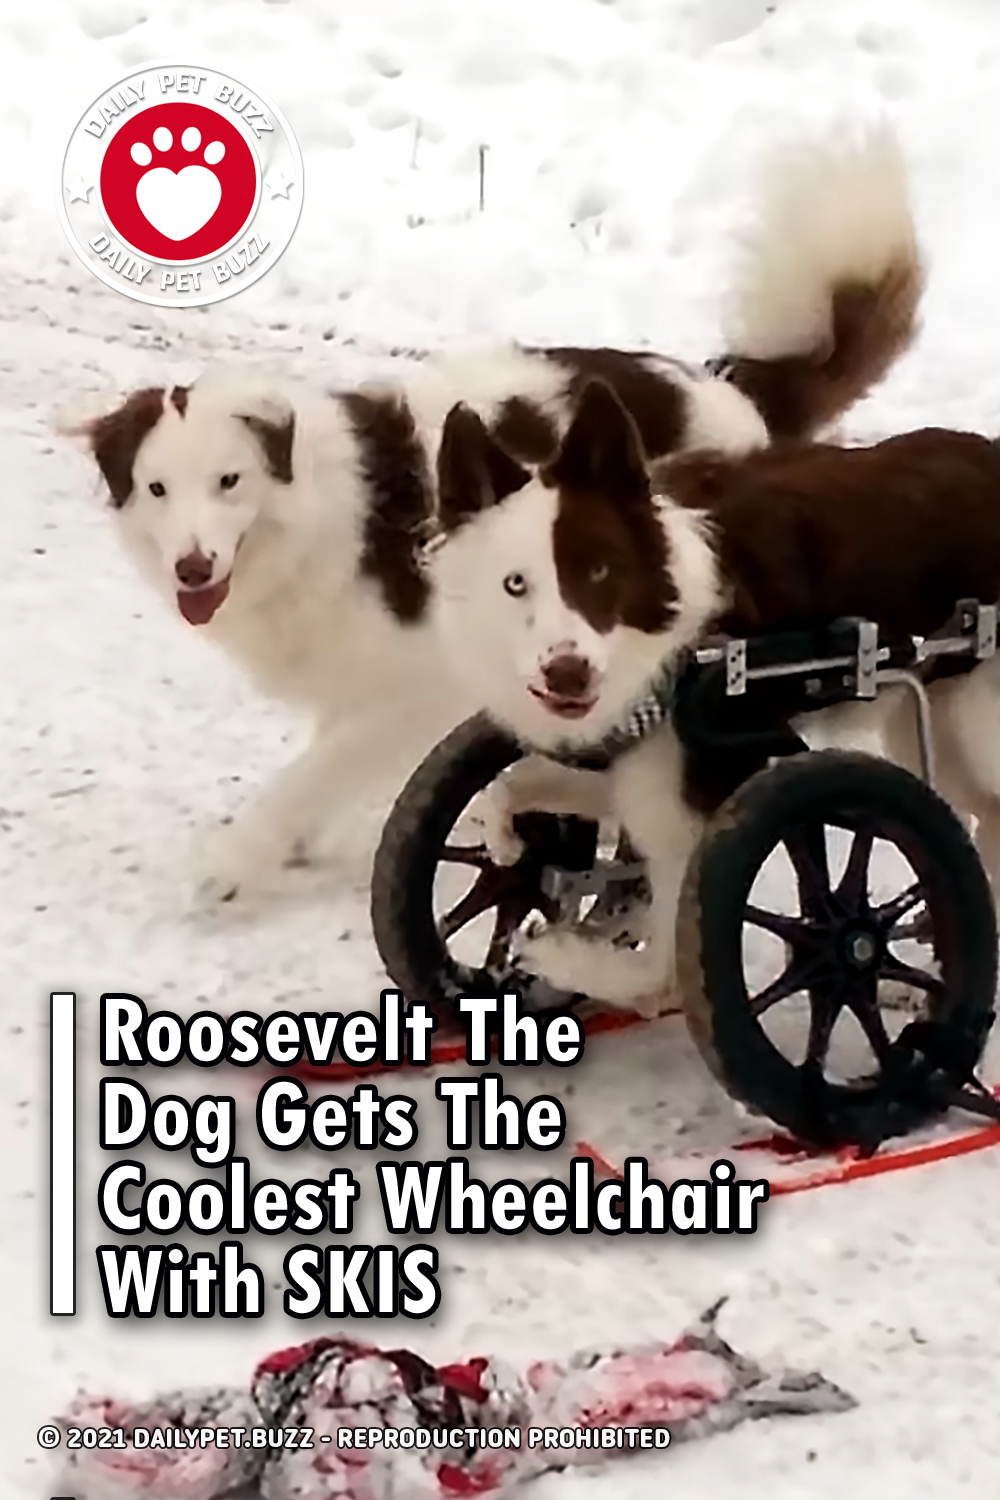 Roosevelt The Dog Gets The Coolest Wheelchair With SKIS